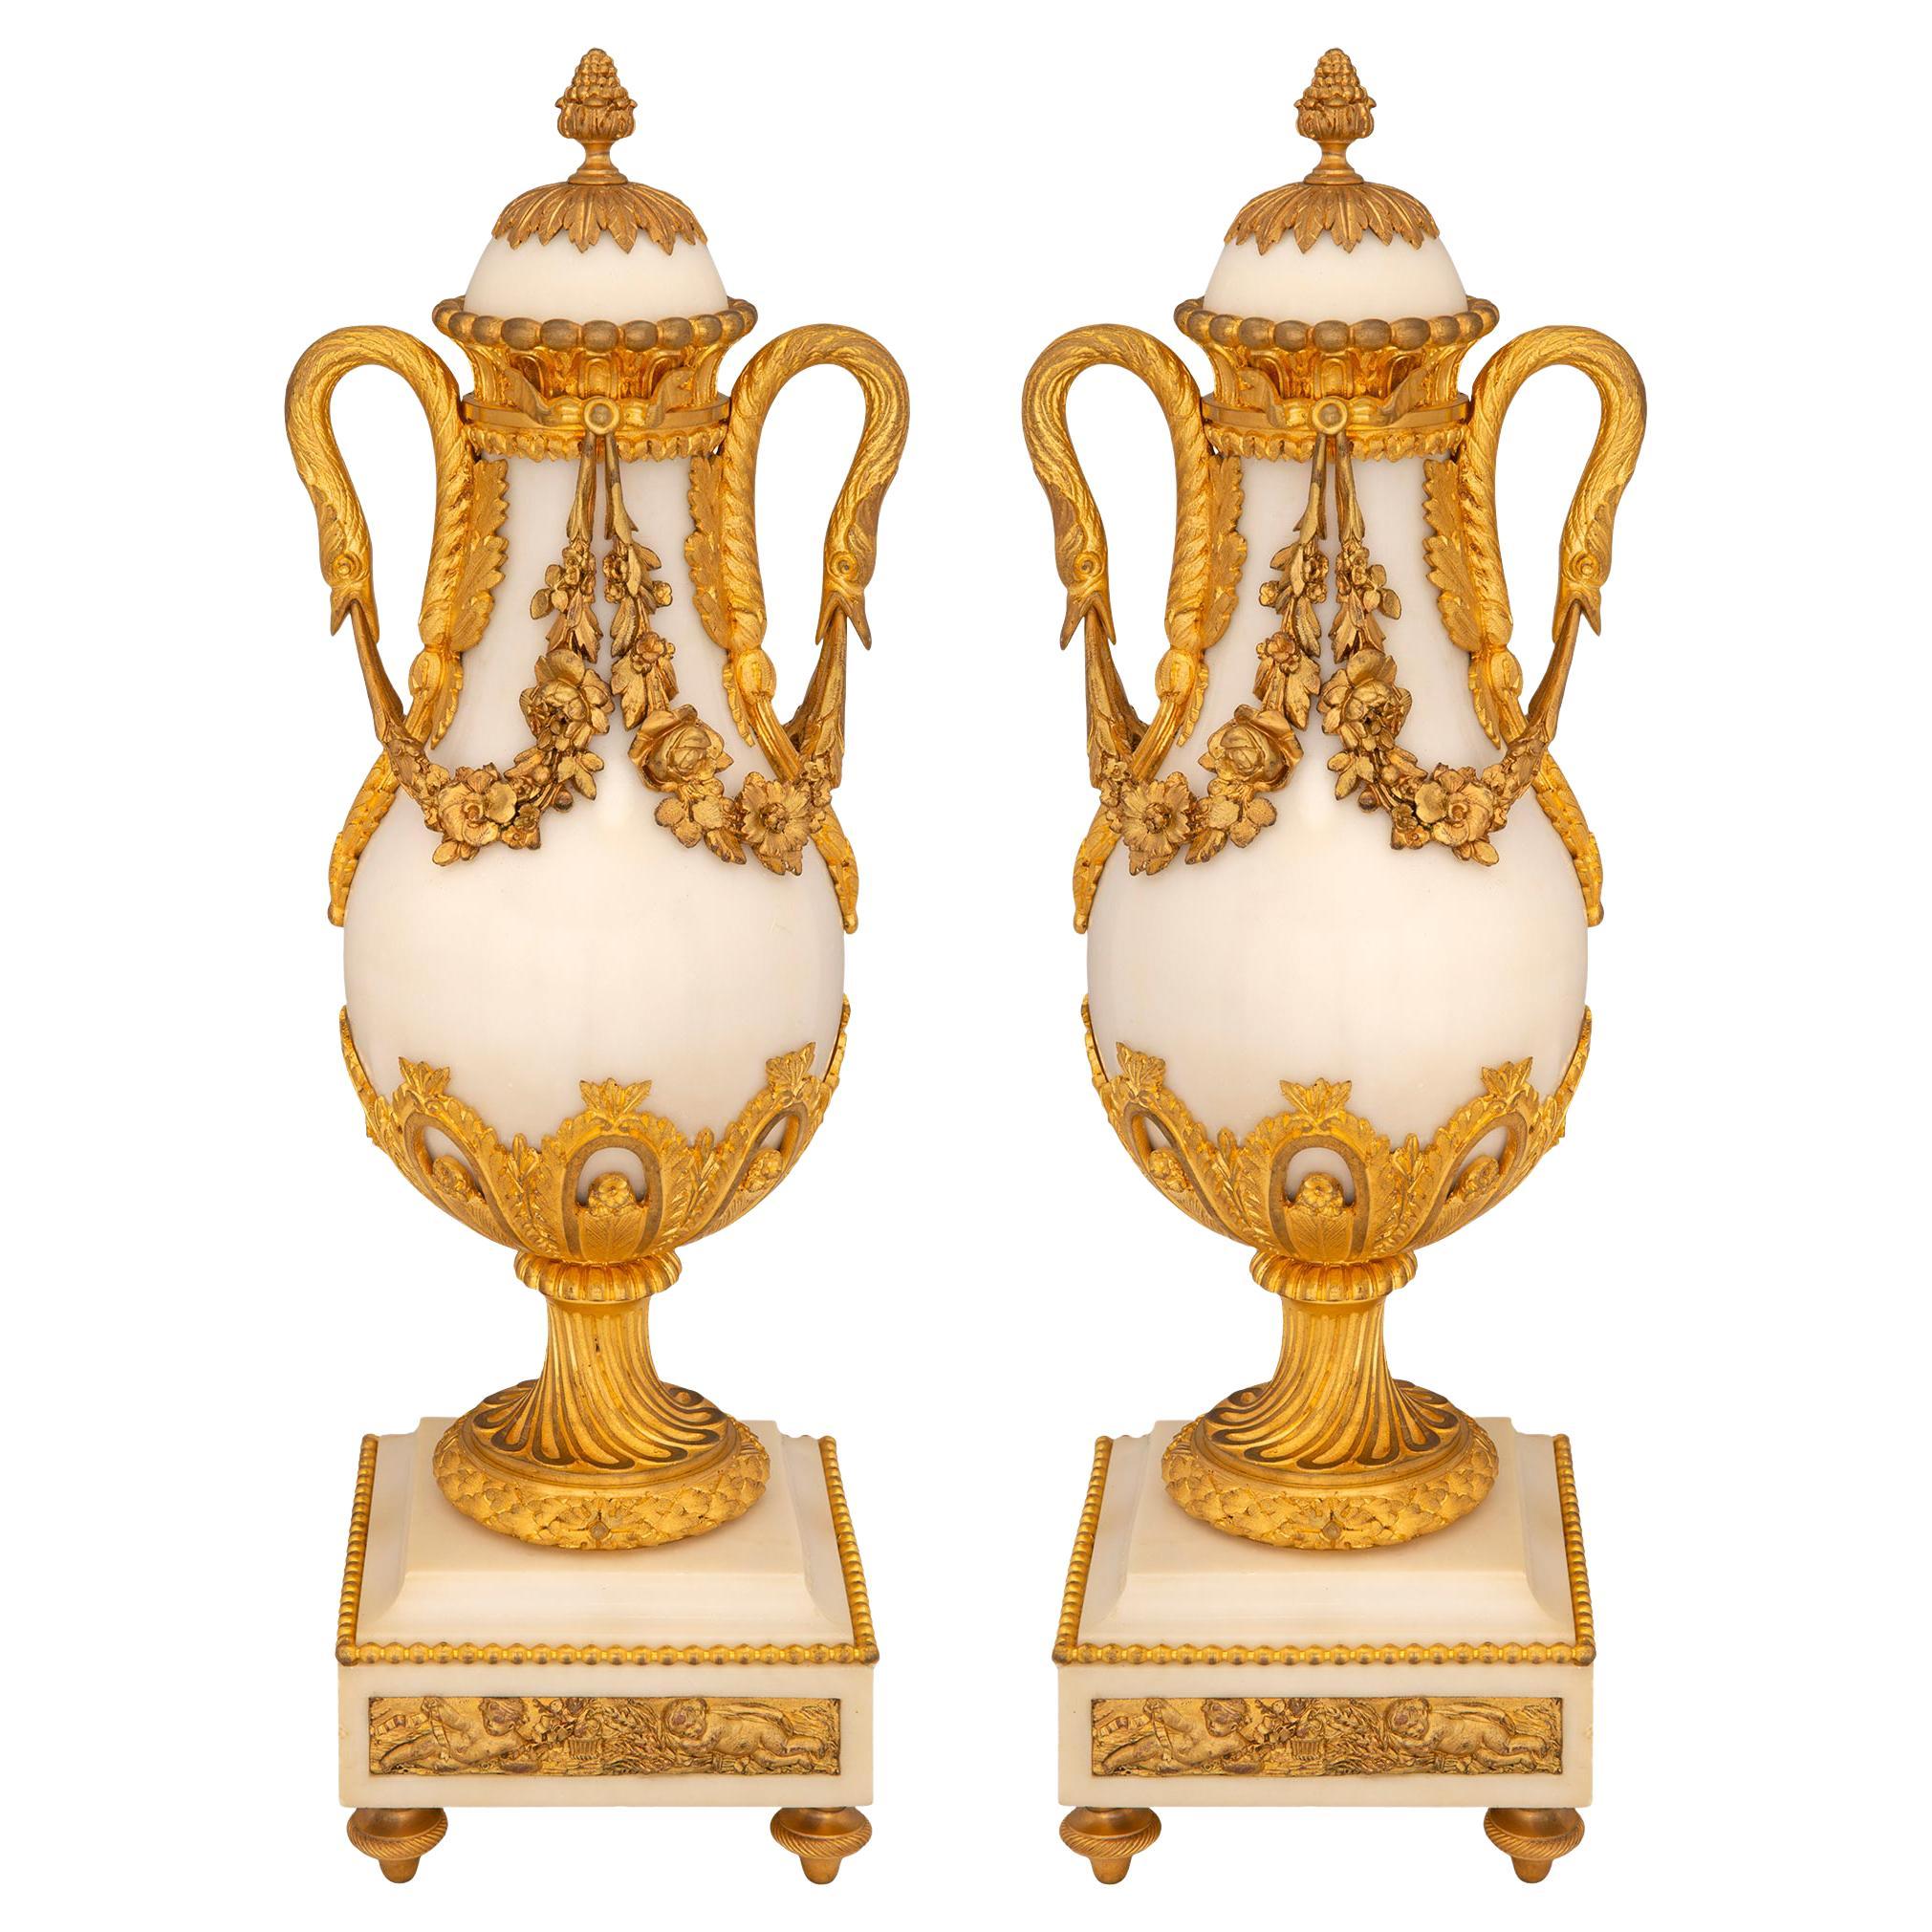 Pair of Mid-19th Century Louis XVI Style Marble and Ormolu Mounted Cassolettes